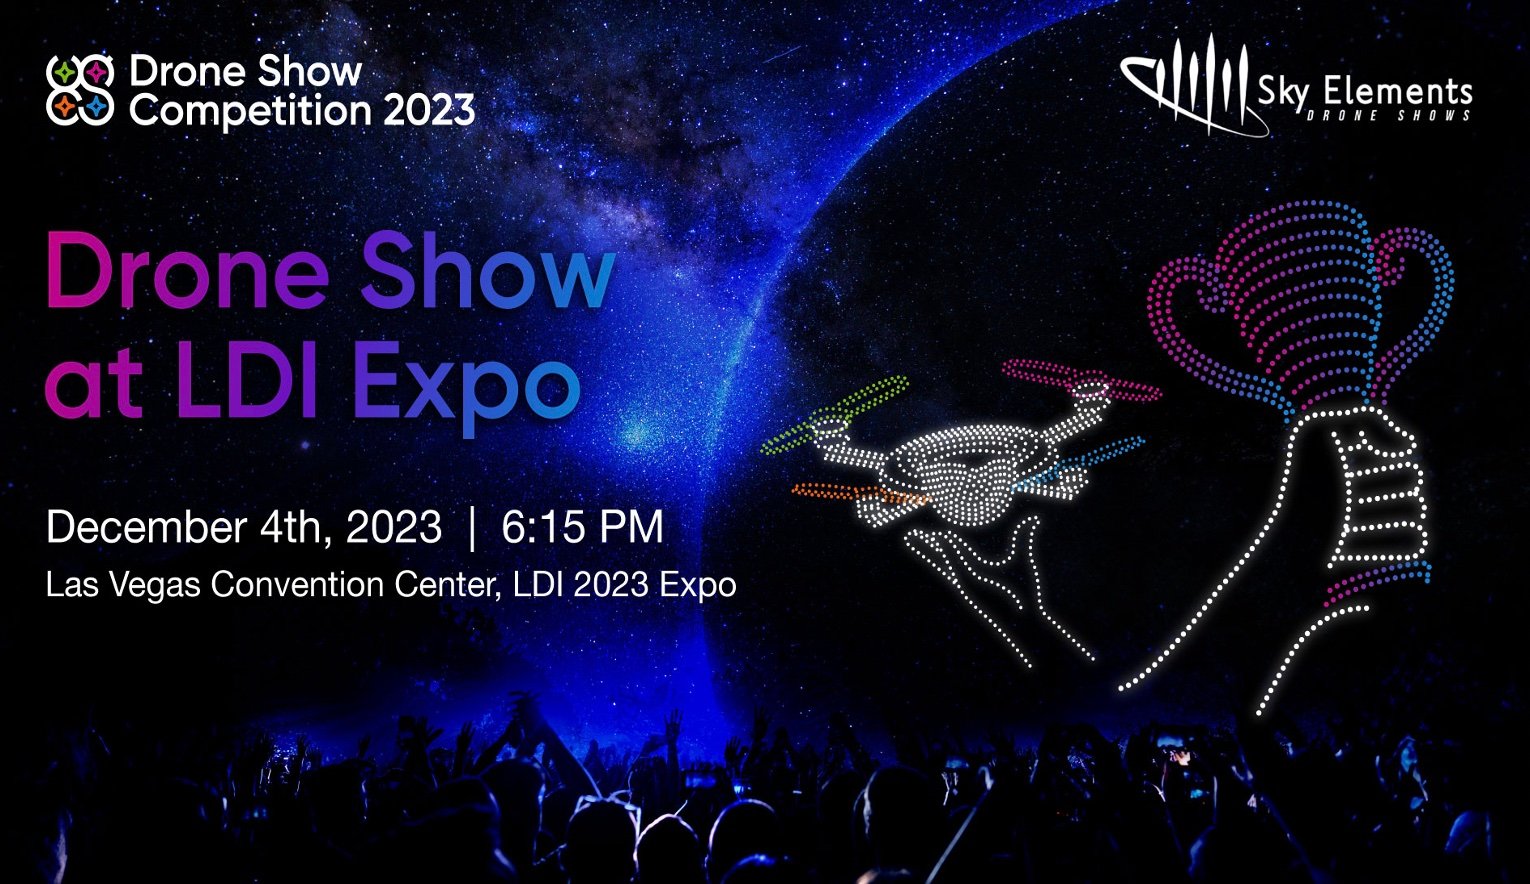 Drone Show at LDI 2023